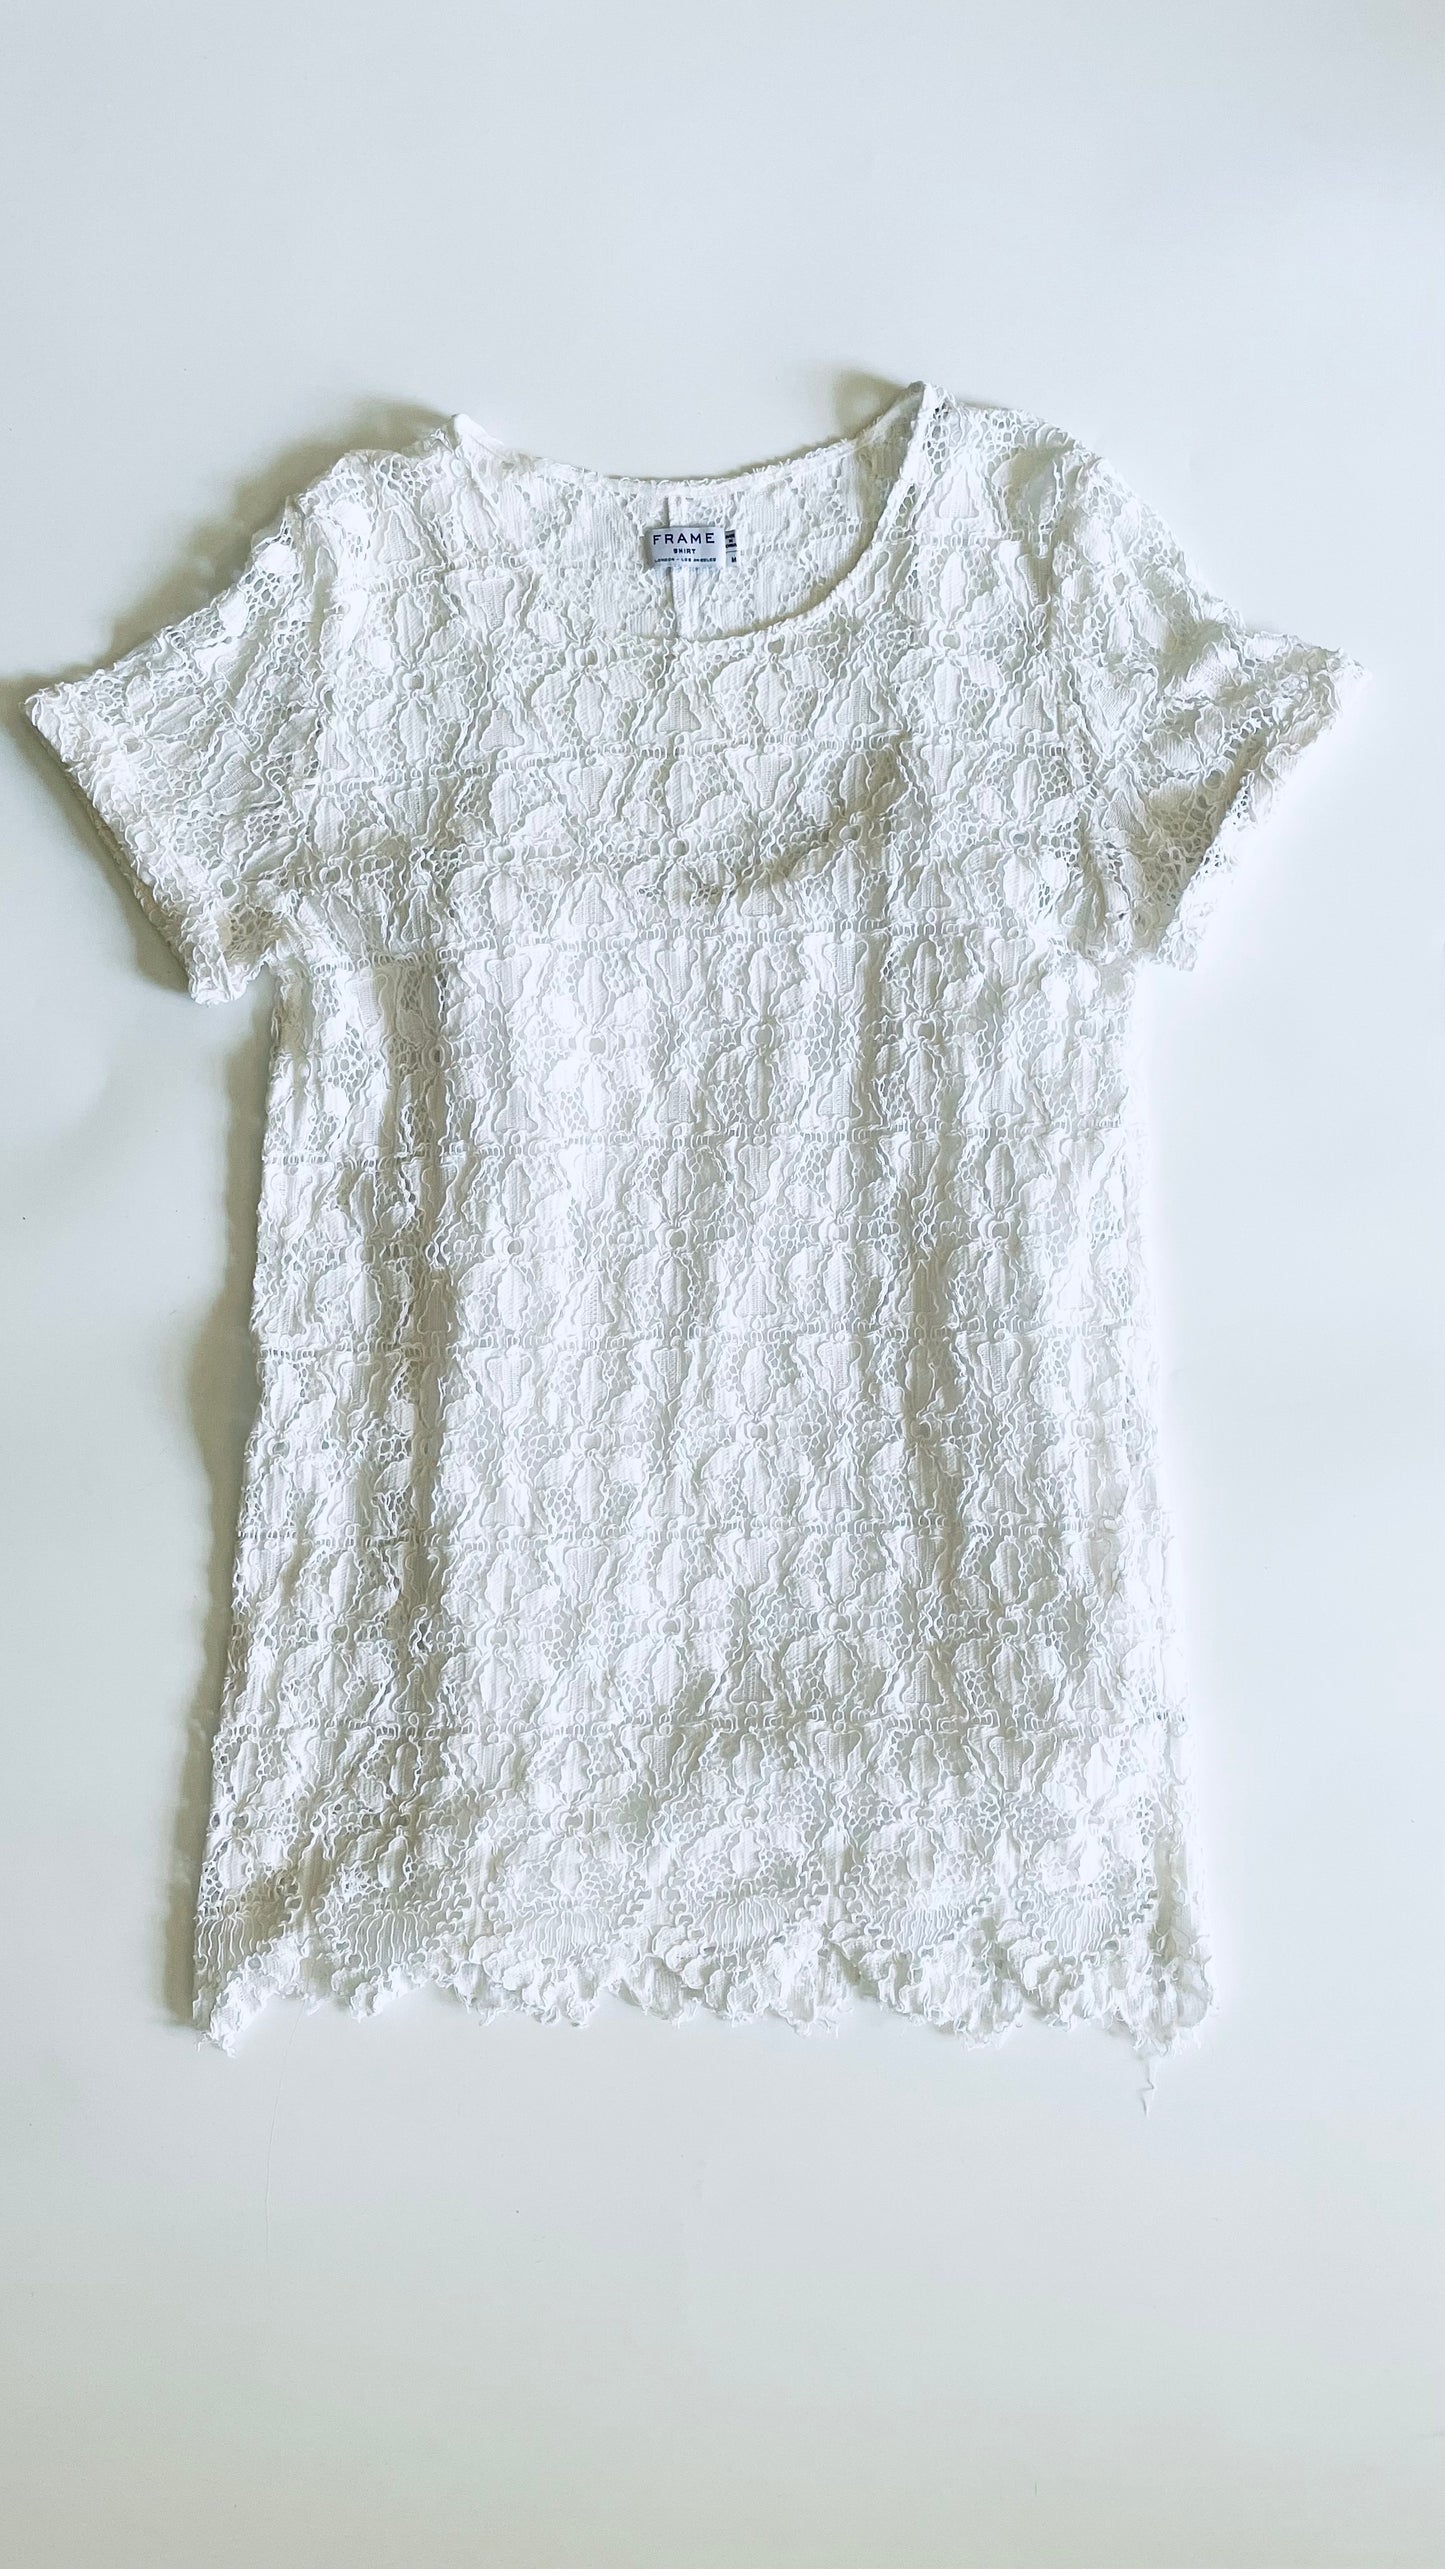 Pre-Loved FRAME white lace t-shirt dress - Size M